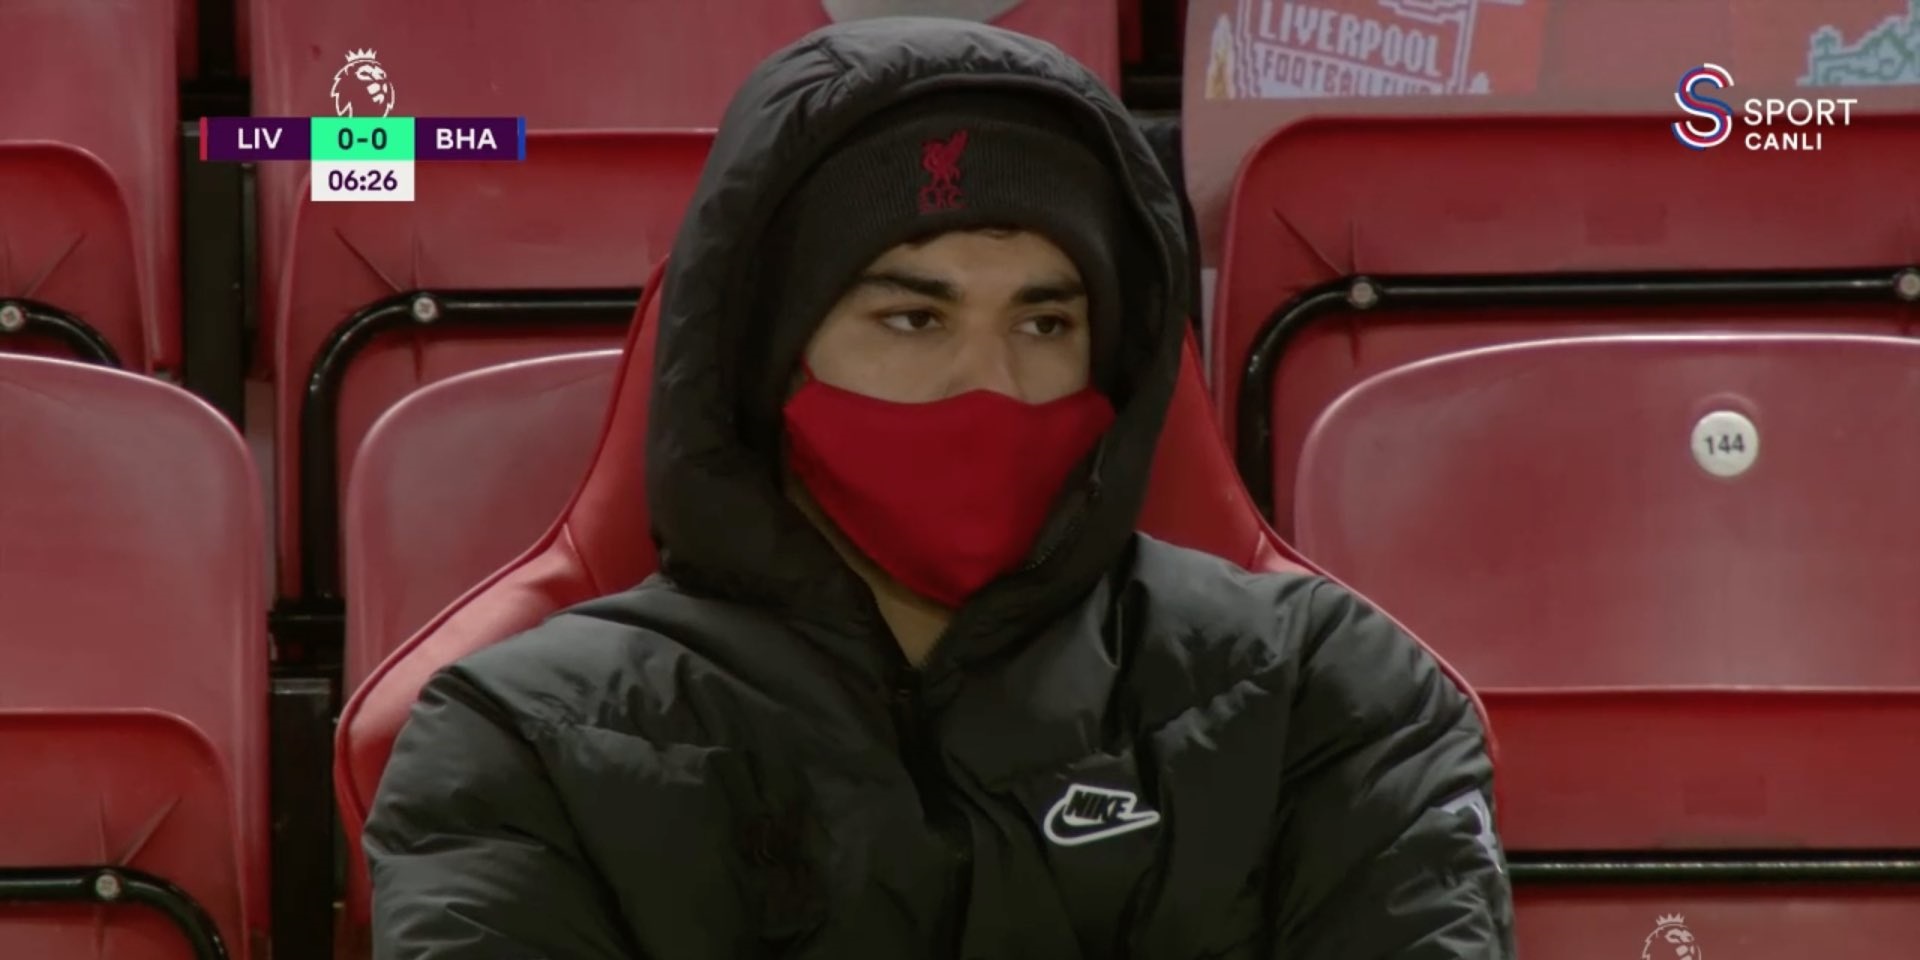 Ozan Kabak and Naby Keita watch on as Liverpool host Brighton at Anfield